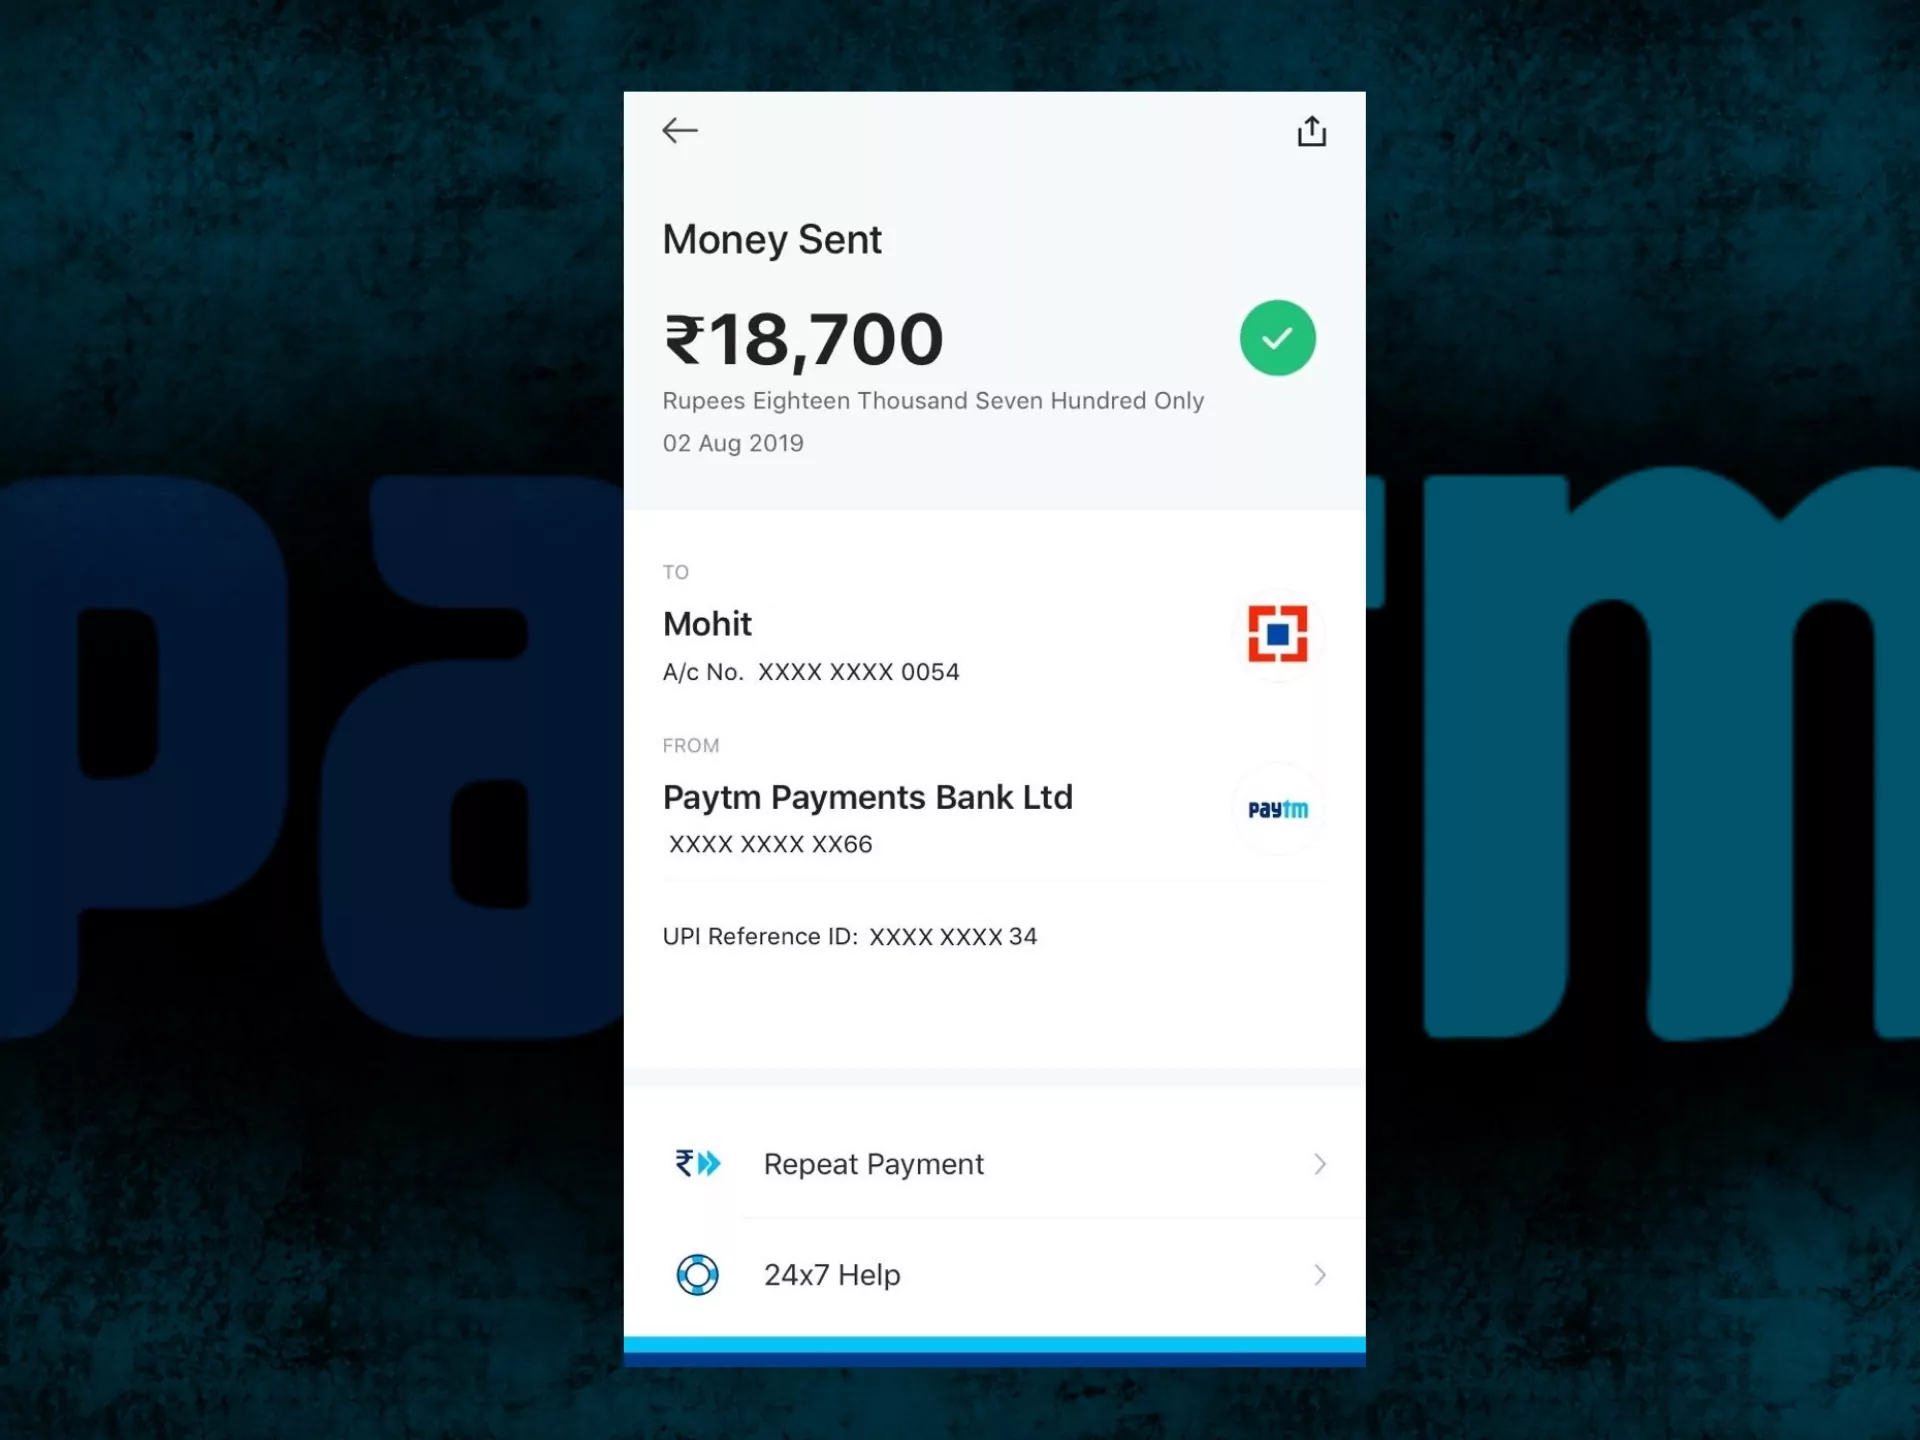 You can fund your PayTM wallet straight from your Indian bank card.